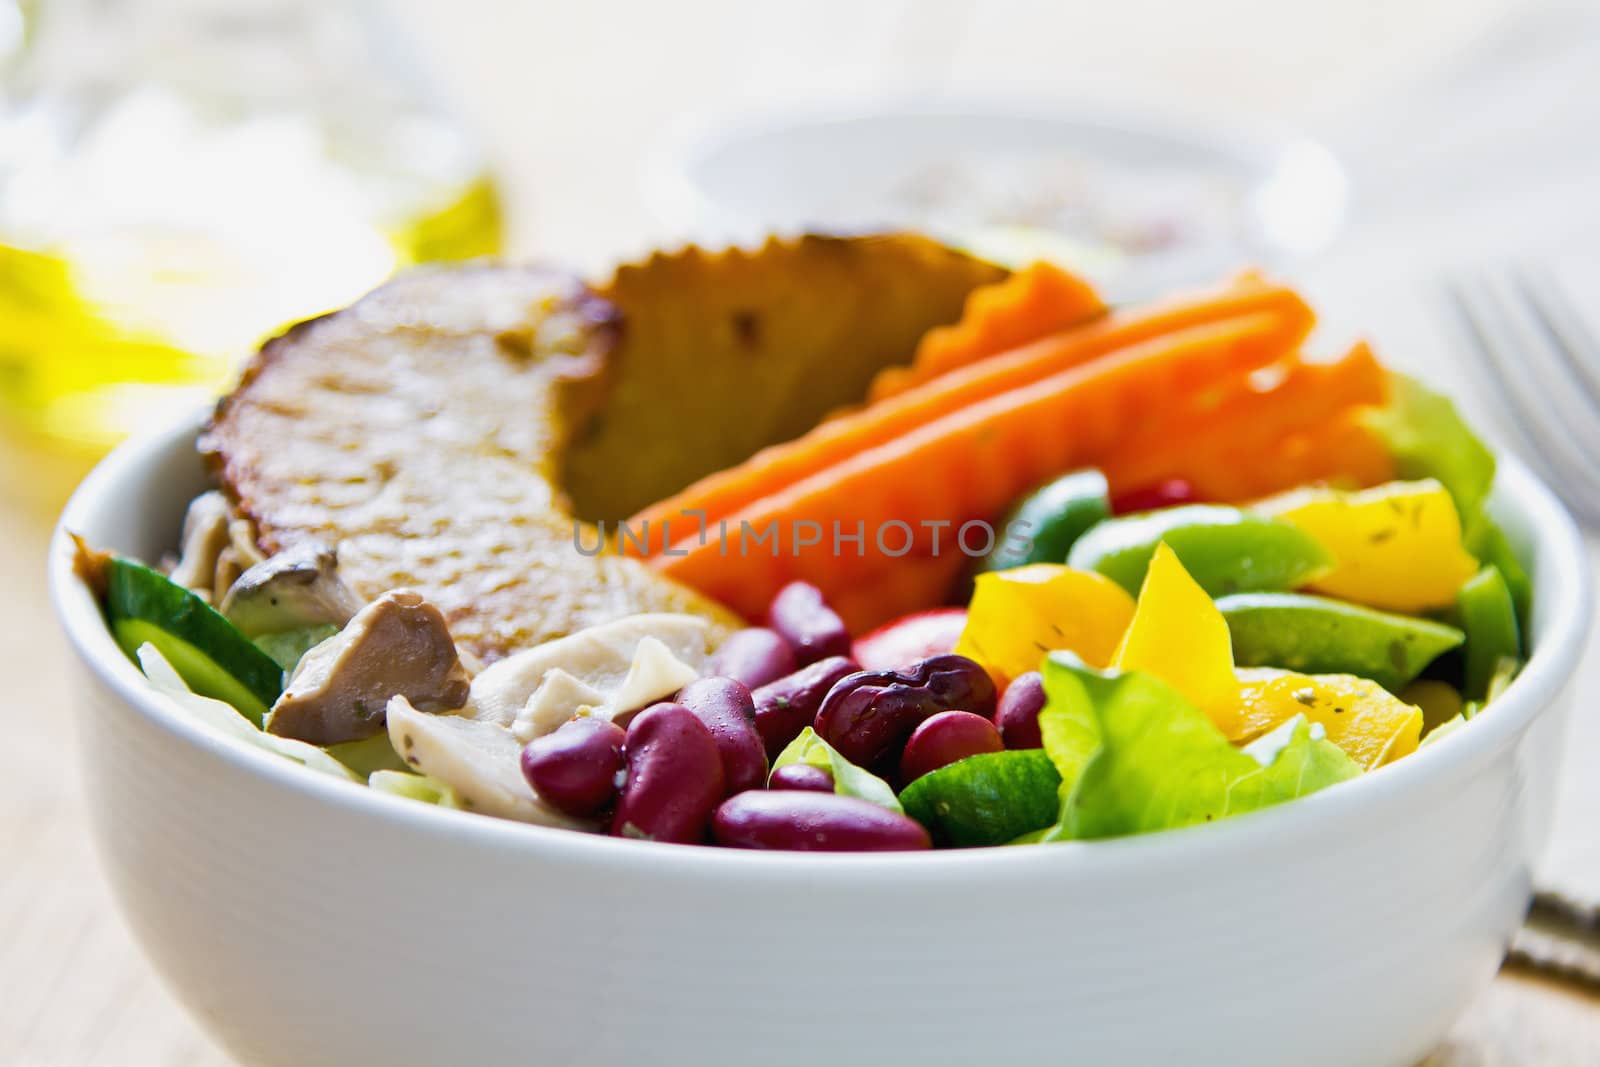 Healthy colourful salad by vanillaechoes